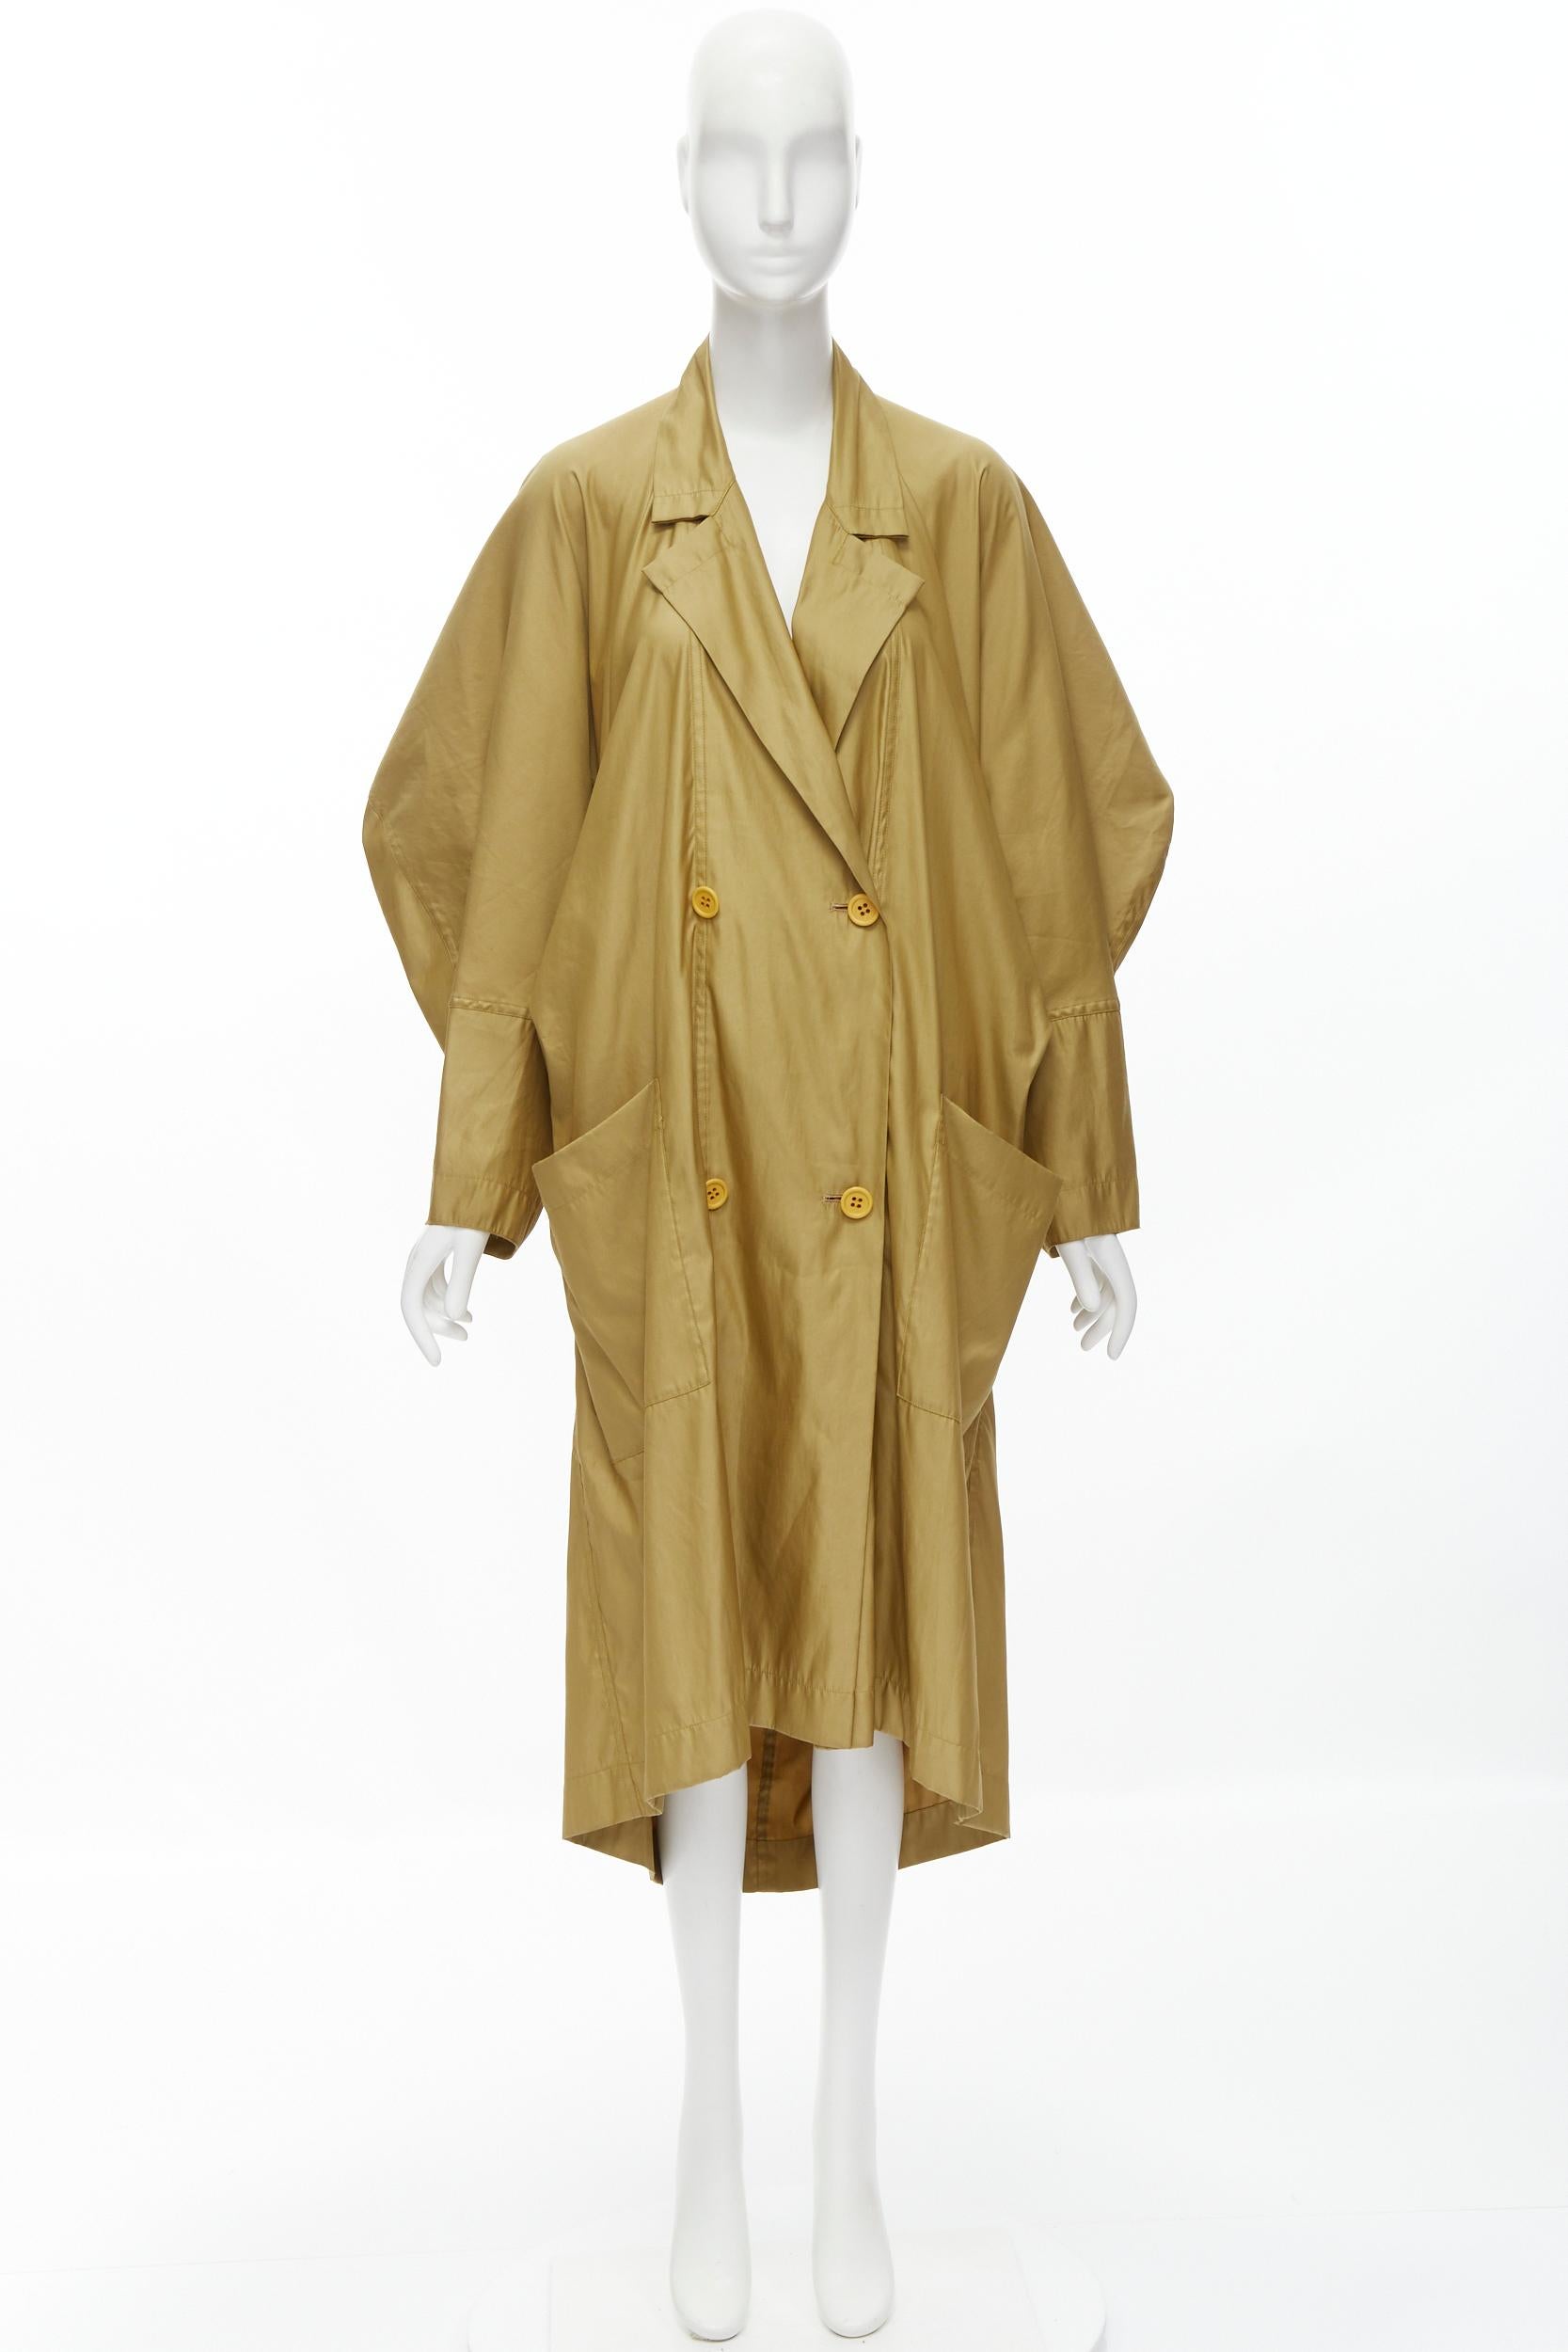 ISSEY MIYAKE Vintage 1980s gold beige parachute draped back trench coat M For Sale 2